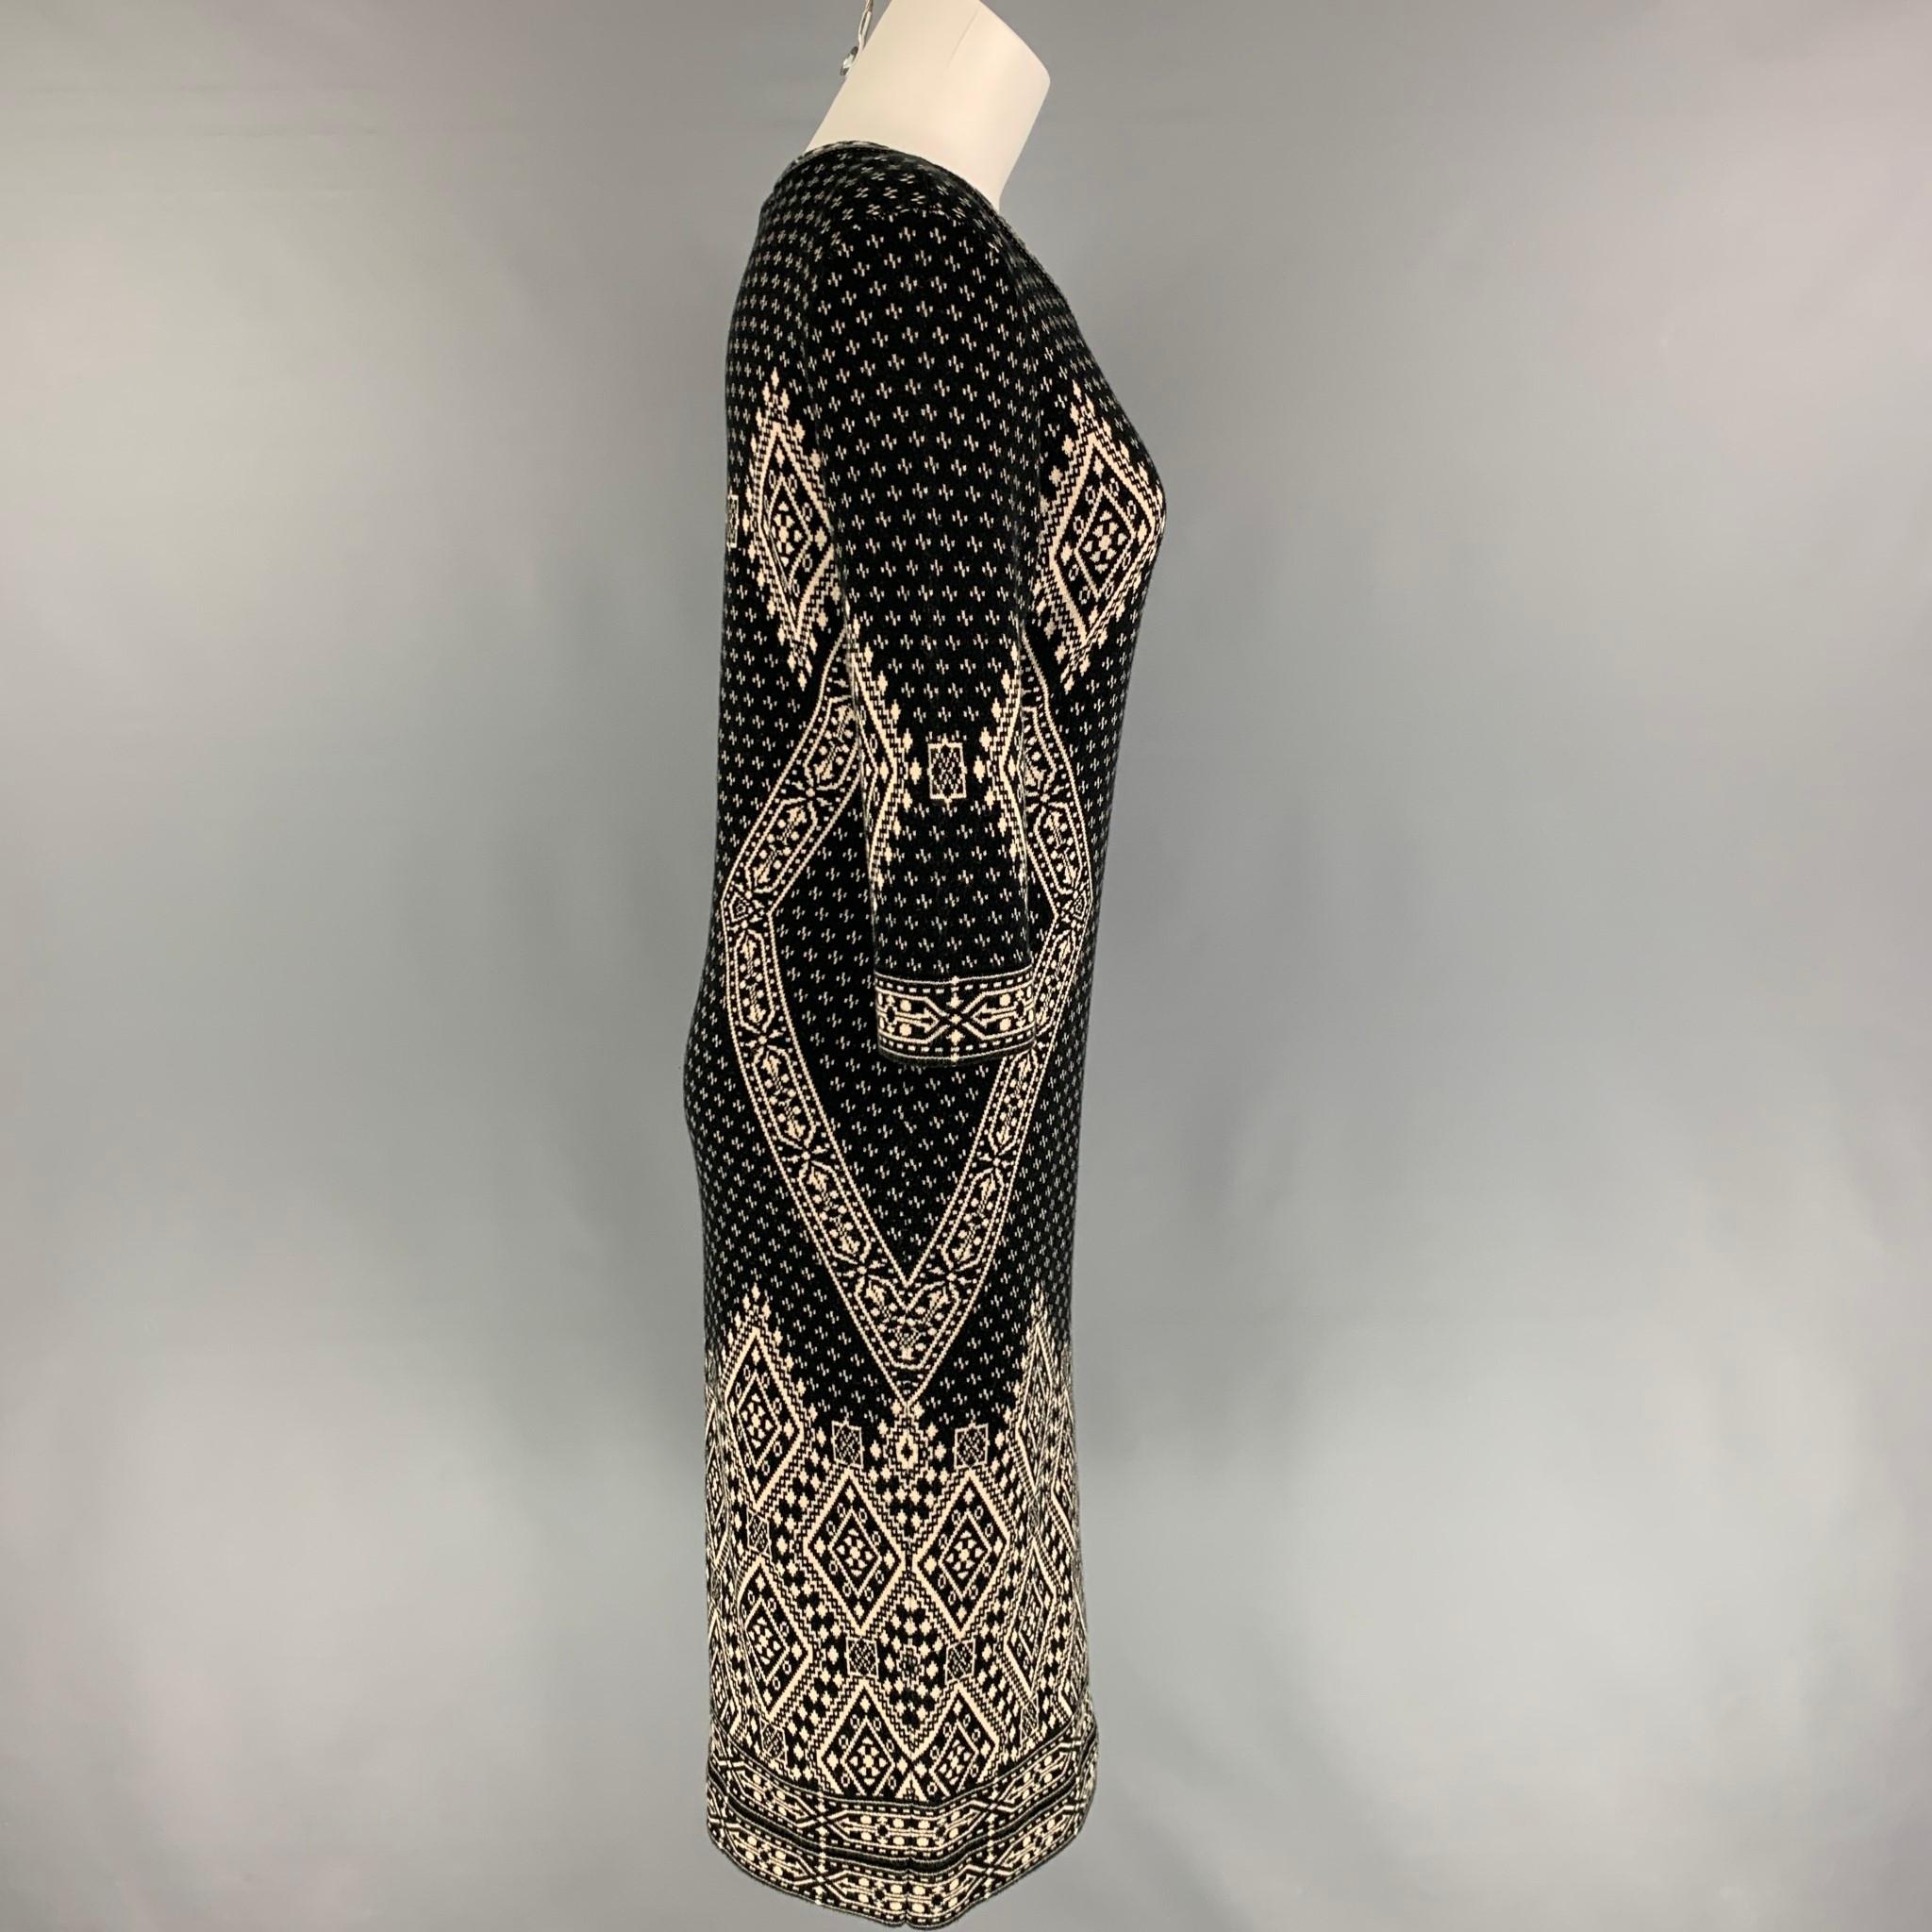 SAKS FIFTH AVENUE dress comes in a black & white print cotton blend featuring a wide neckline and 3/4 sleeves. 

Very Good Pre-Owned Condition.
Marked: M

Measurements:

Shoulder: 16.5 in.
Bust: 34 in.
Waist: 30 in.
Hip: 34 in.
Sleeve: 17